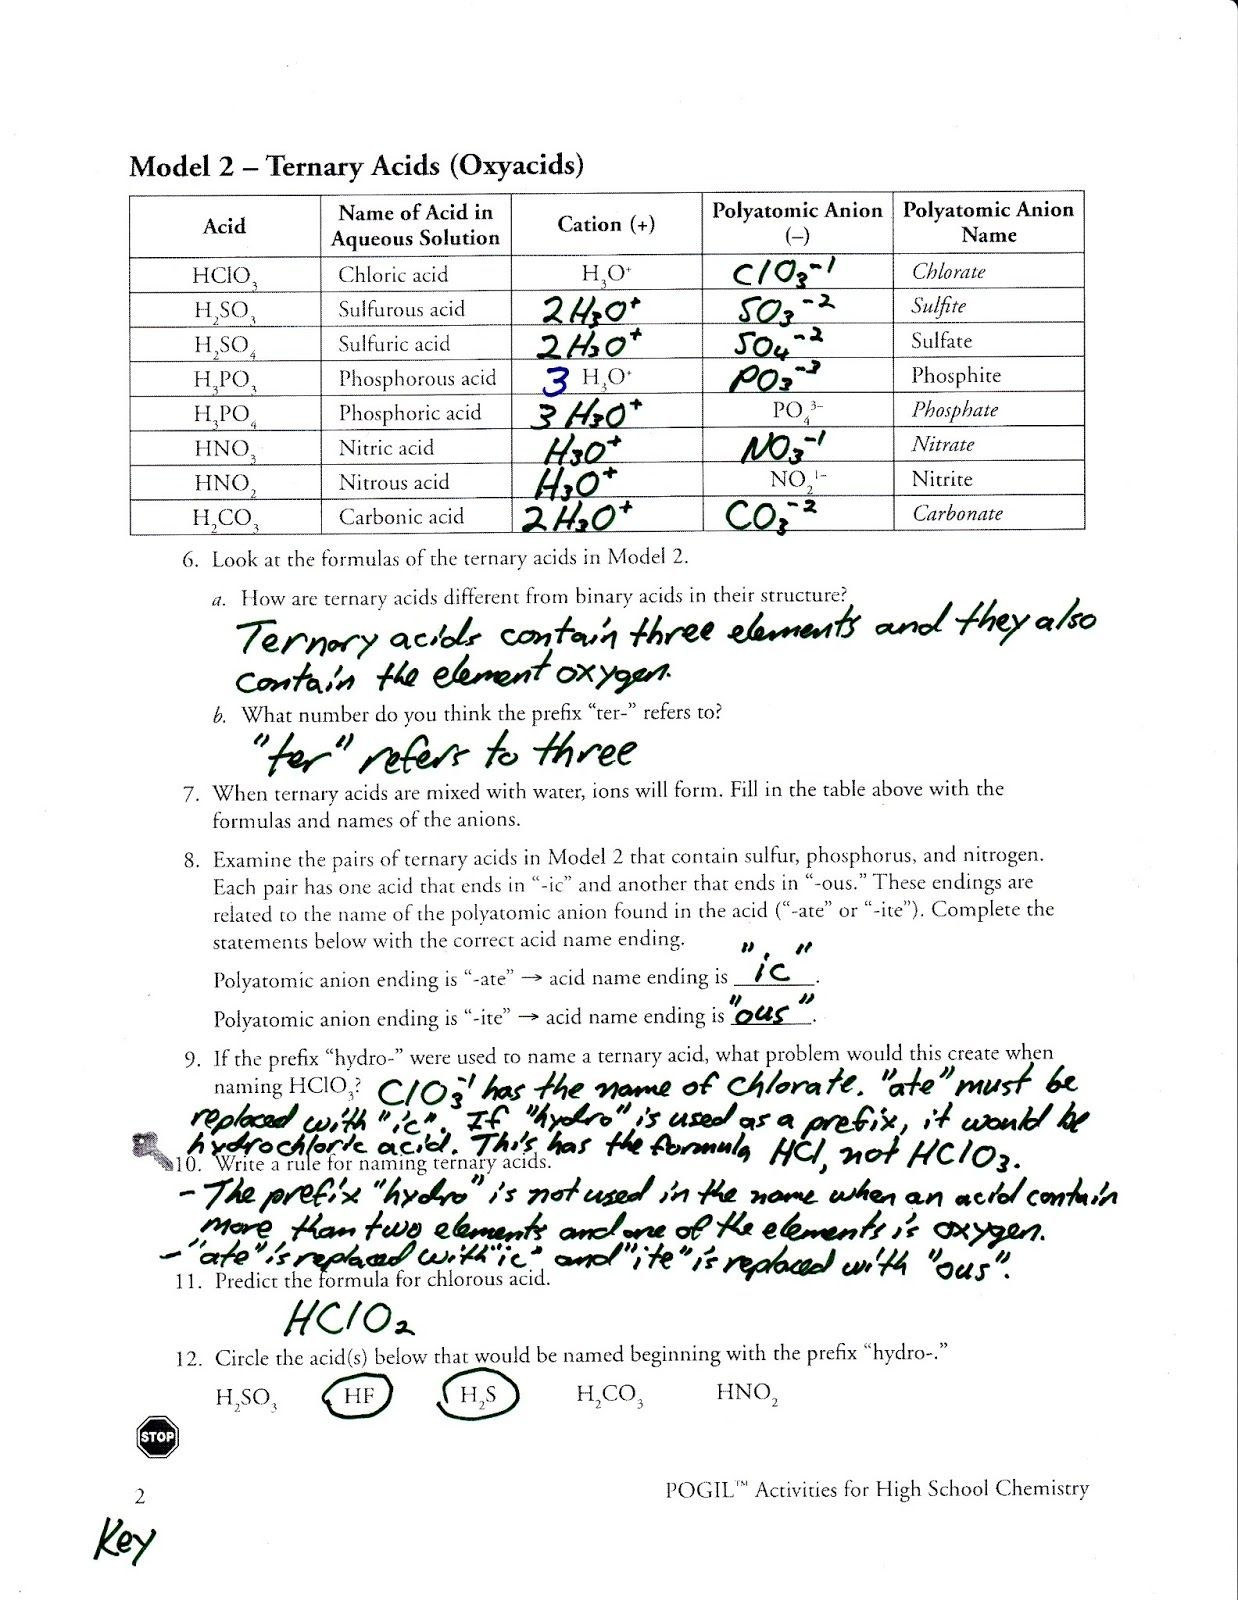 polyatomic-ions-answer-key-pogil-nouns-and-verbs-worksheets-text-to